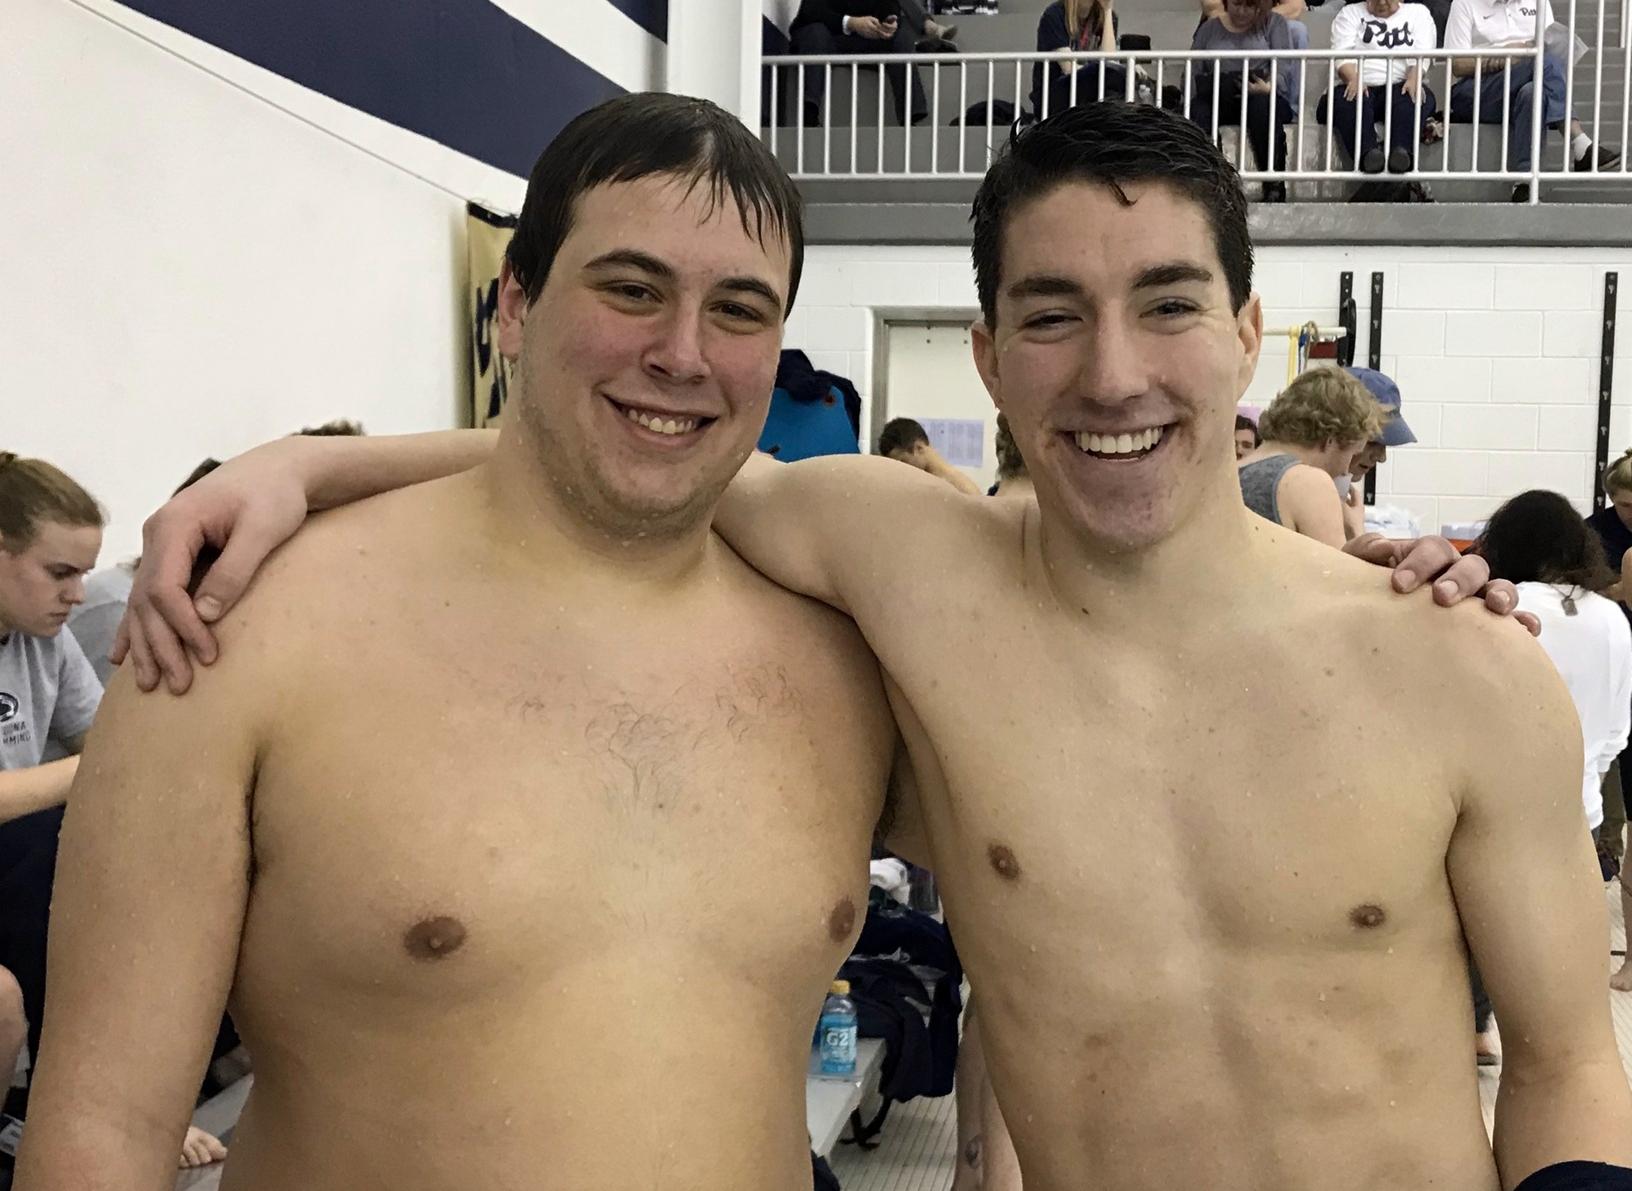 Photo: Penn State Altoona sophomores Gino Cercone (left) and Tanner Yaw (right) competed together in the 100 Yard Butterfly on Friday night.